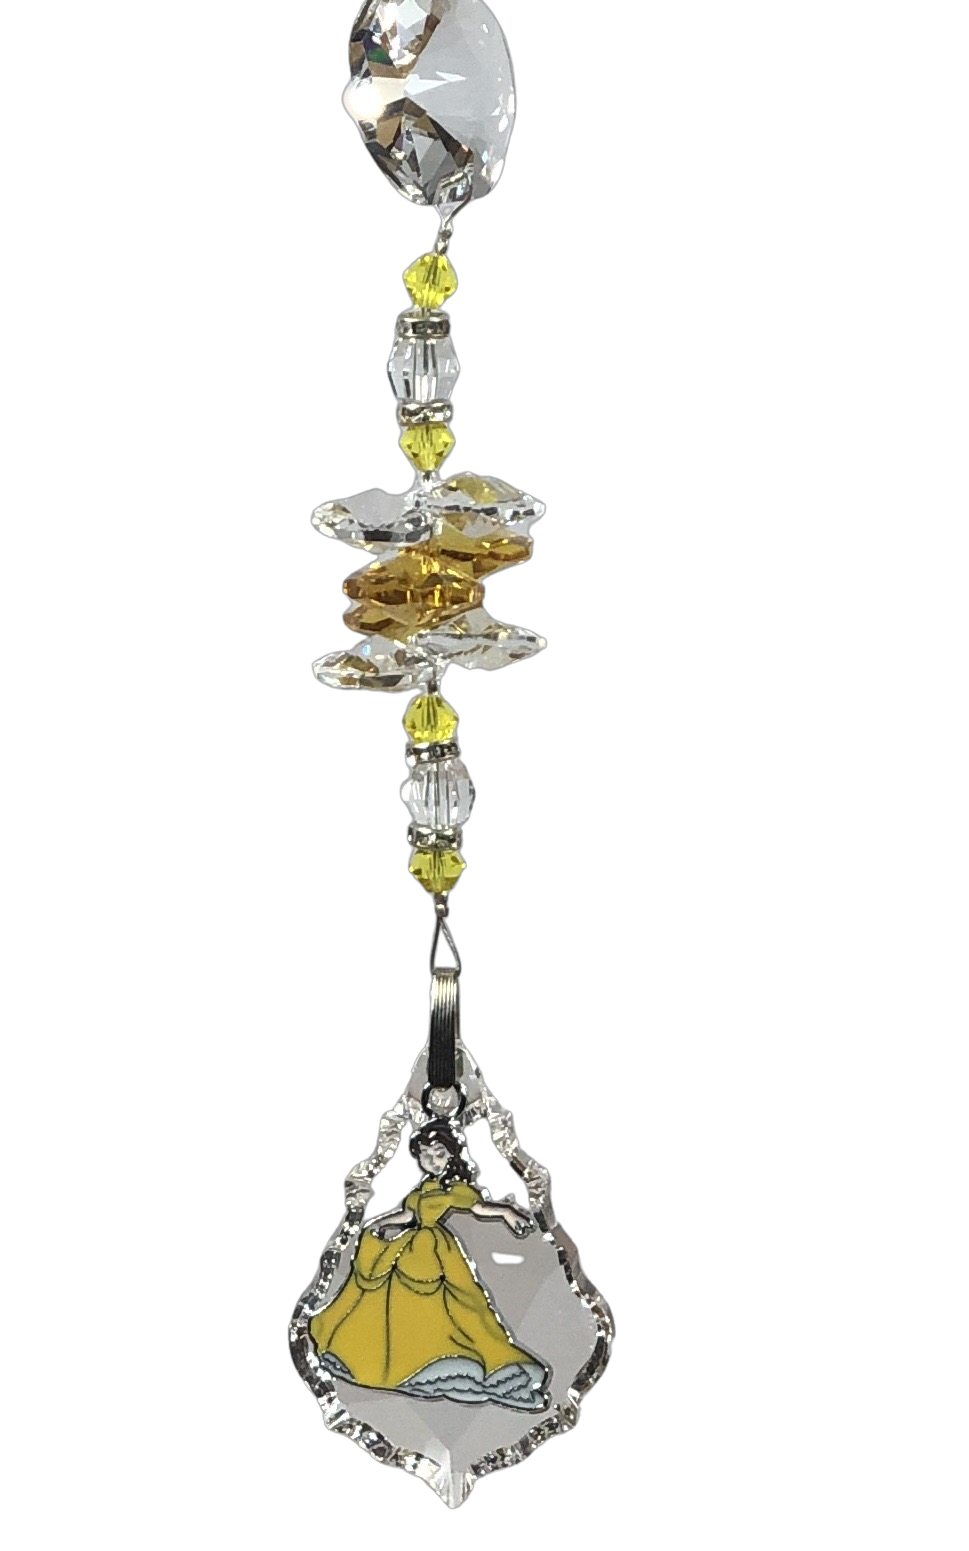 Beauty & the Beast - Belle crystal suncatcher, decorated with 50mm Starburst crystal and citrine gemstone.